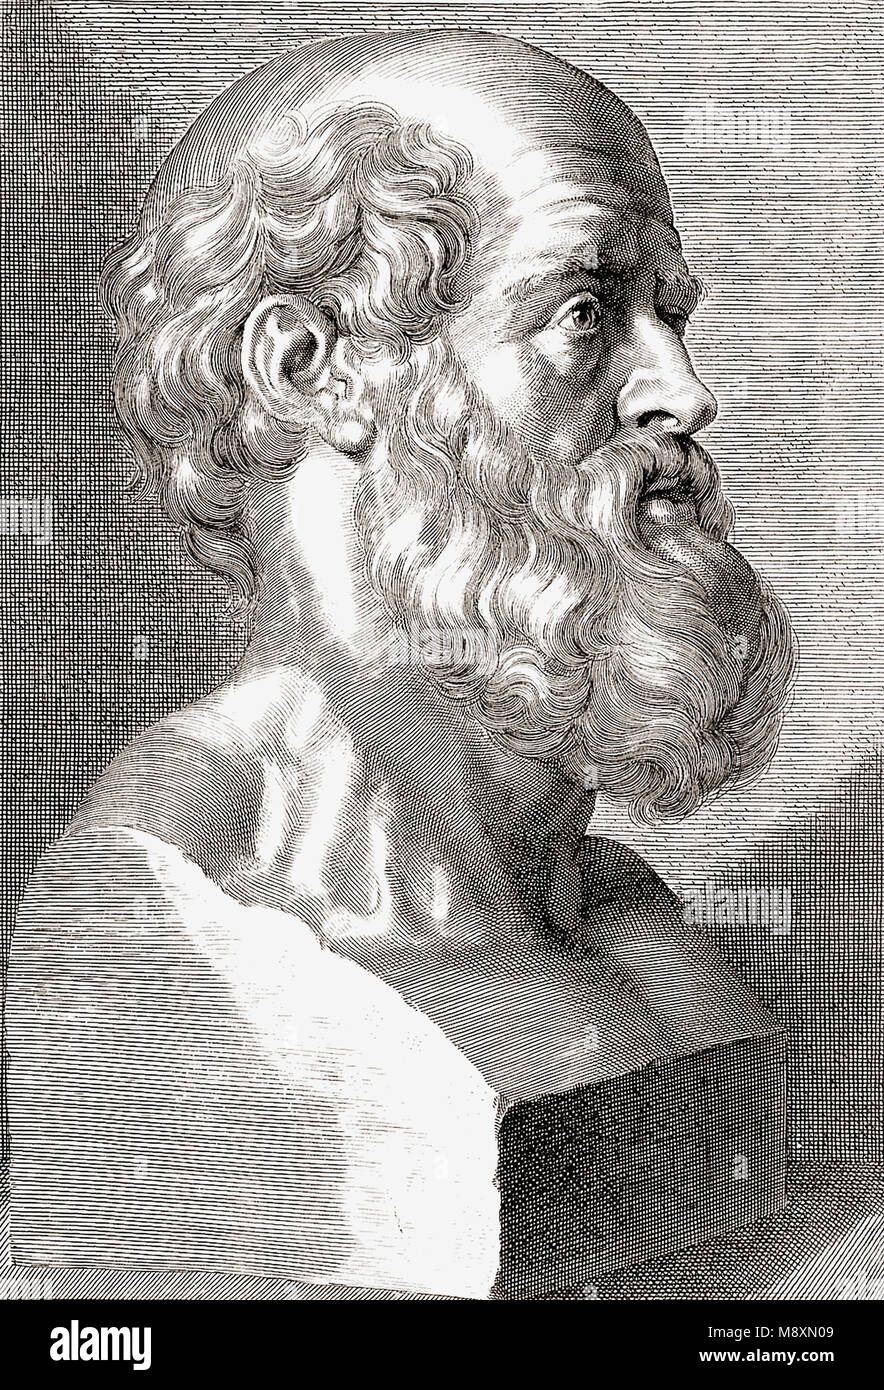 Hippocrates of Cos or Hippokrates of Kos, c.460 BC to c. 370 BC.  Ancient Greek physician of the Age of Pericles. Stock Photo